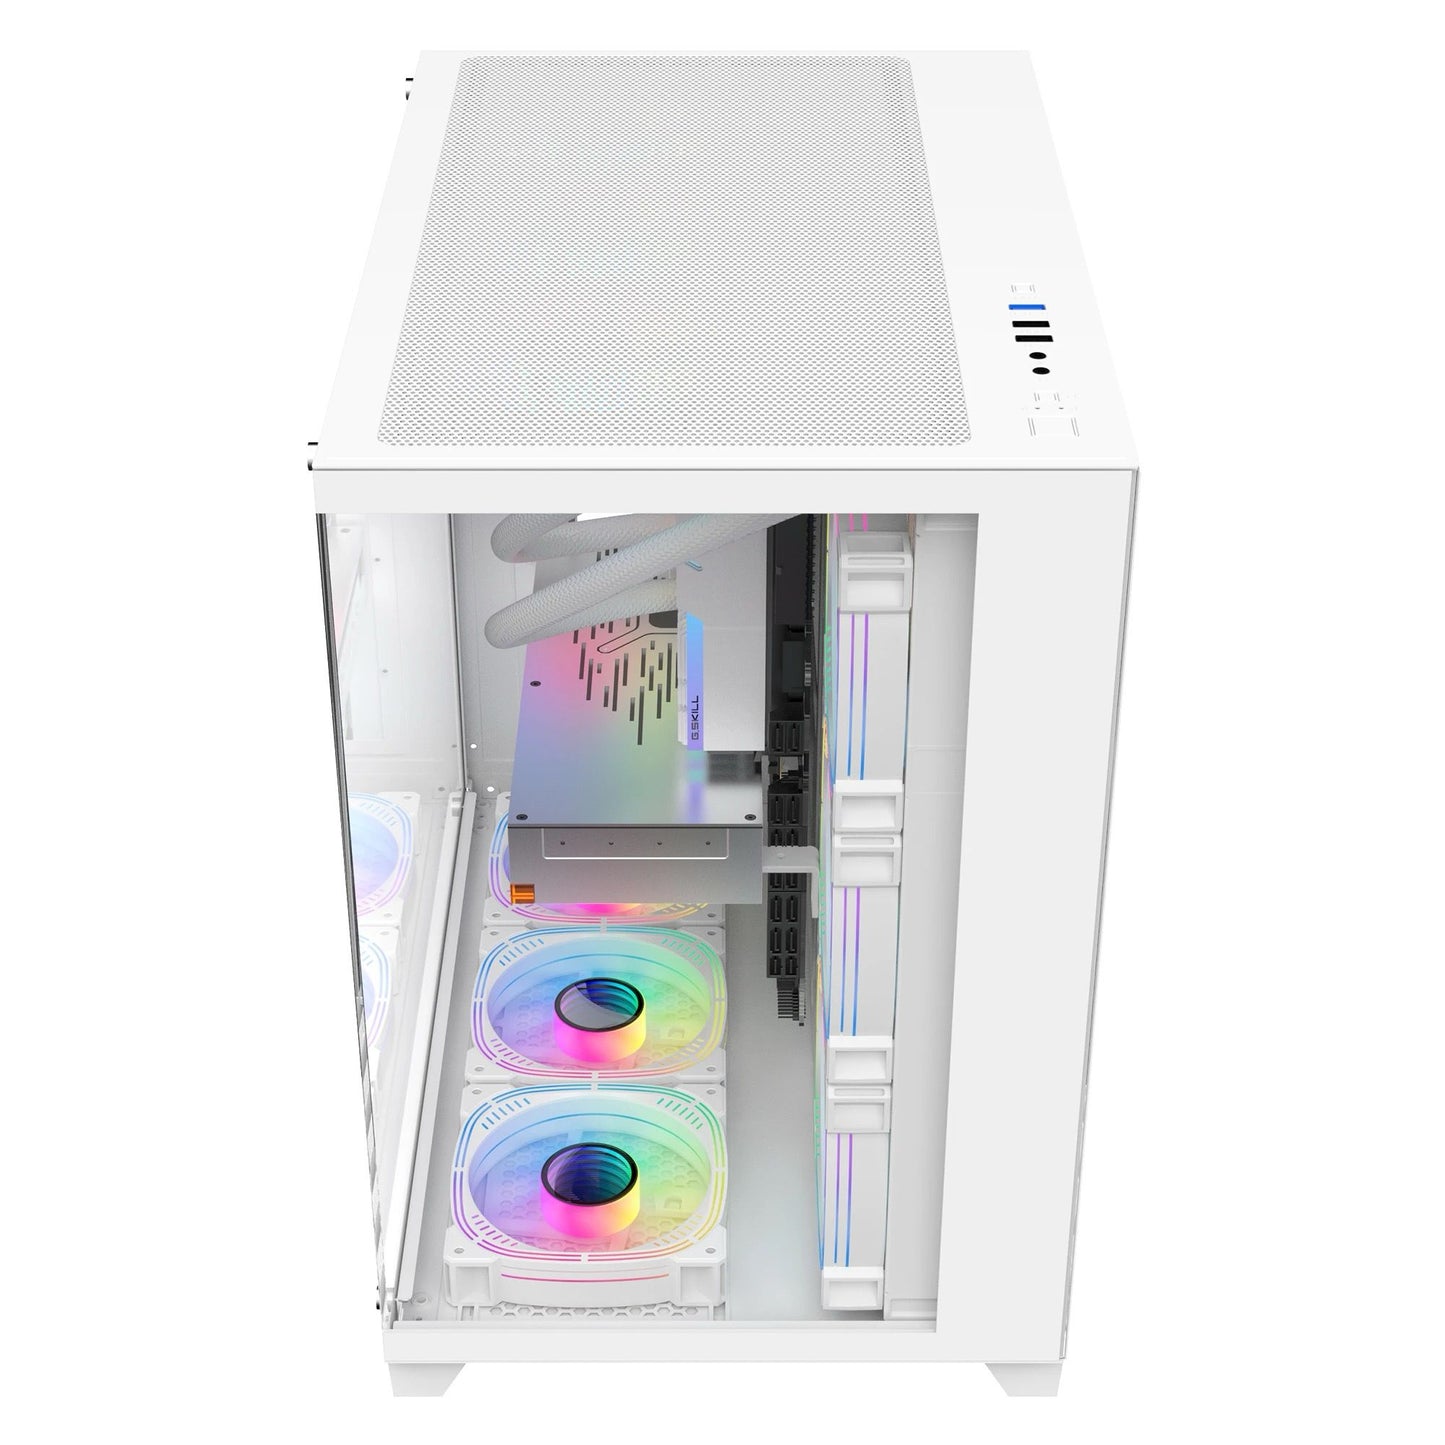 Two Panel White Transparent Tempered Glass 0.7mm SPCC Cool OEM Design Computer Accessories USB3.0 ATX Mid Tower PC Case